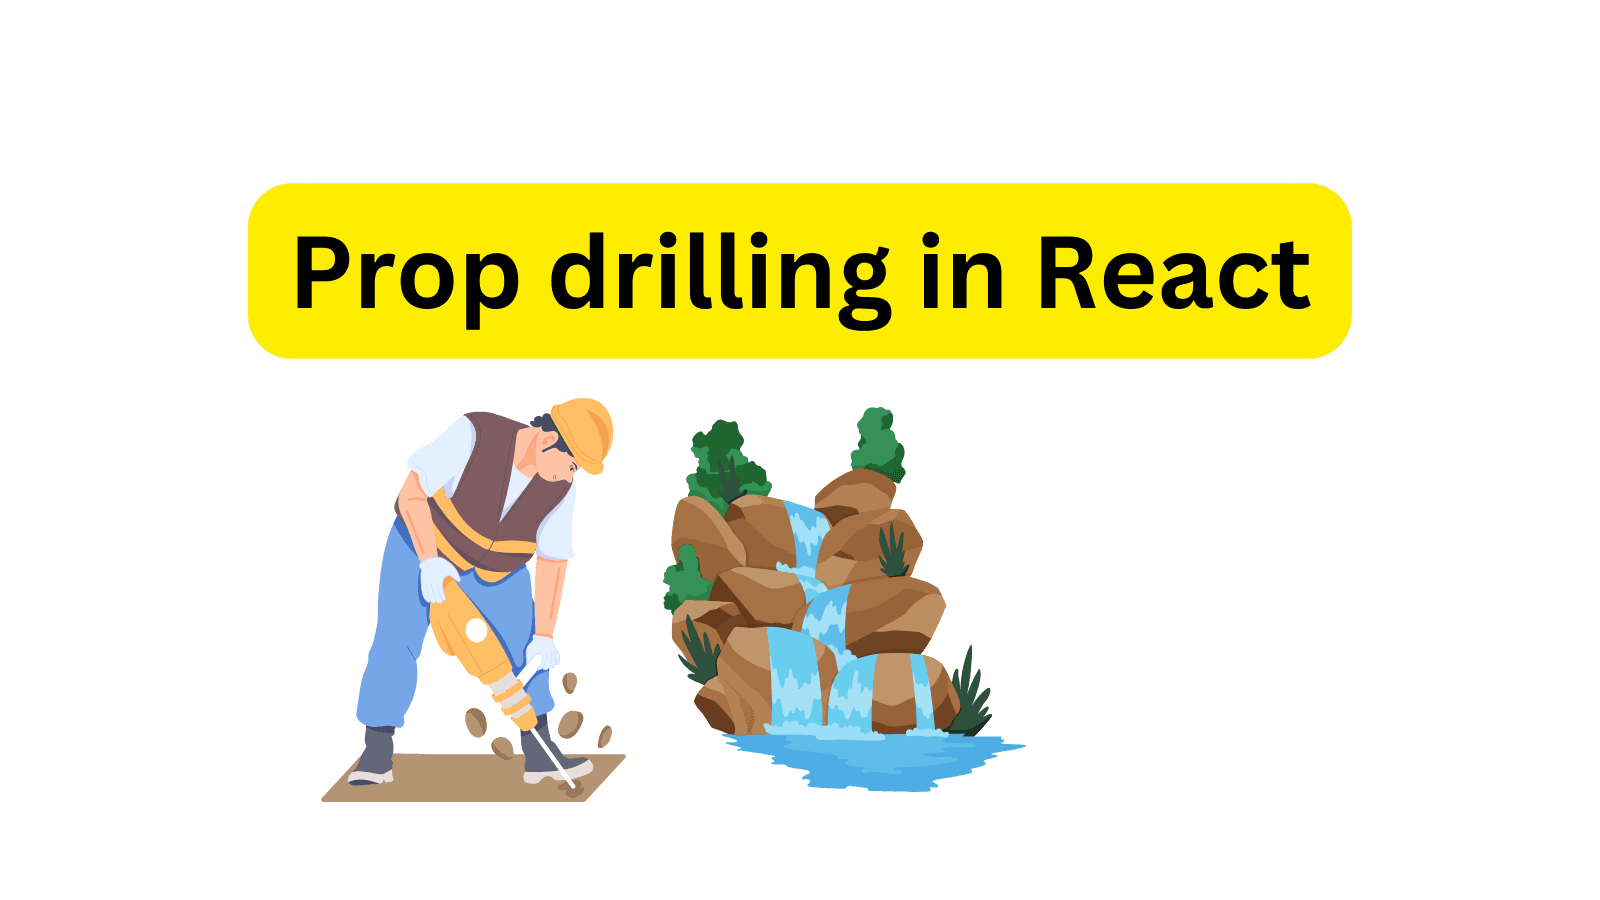 What is prop drilling in React